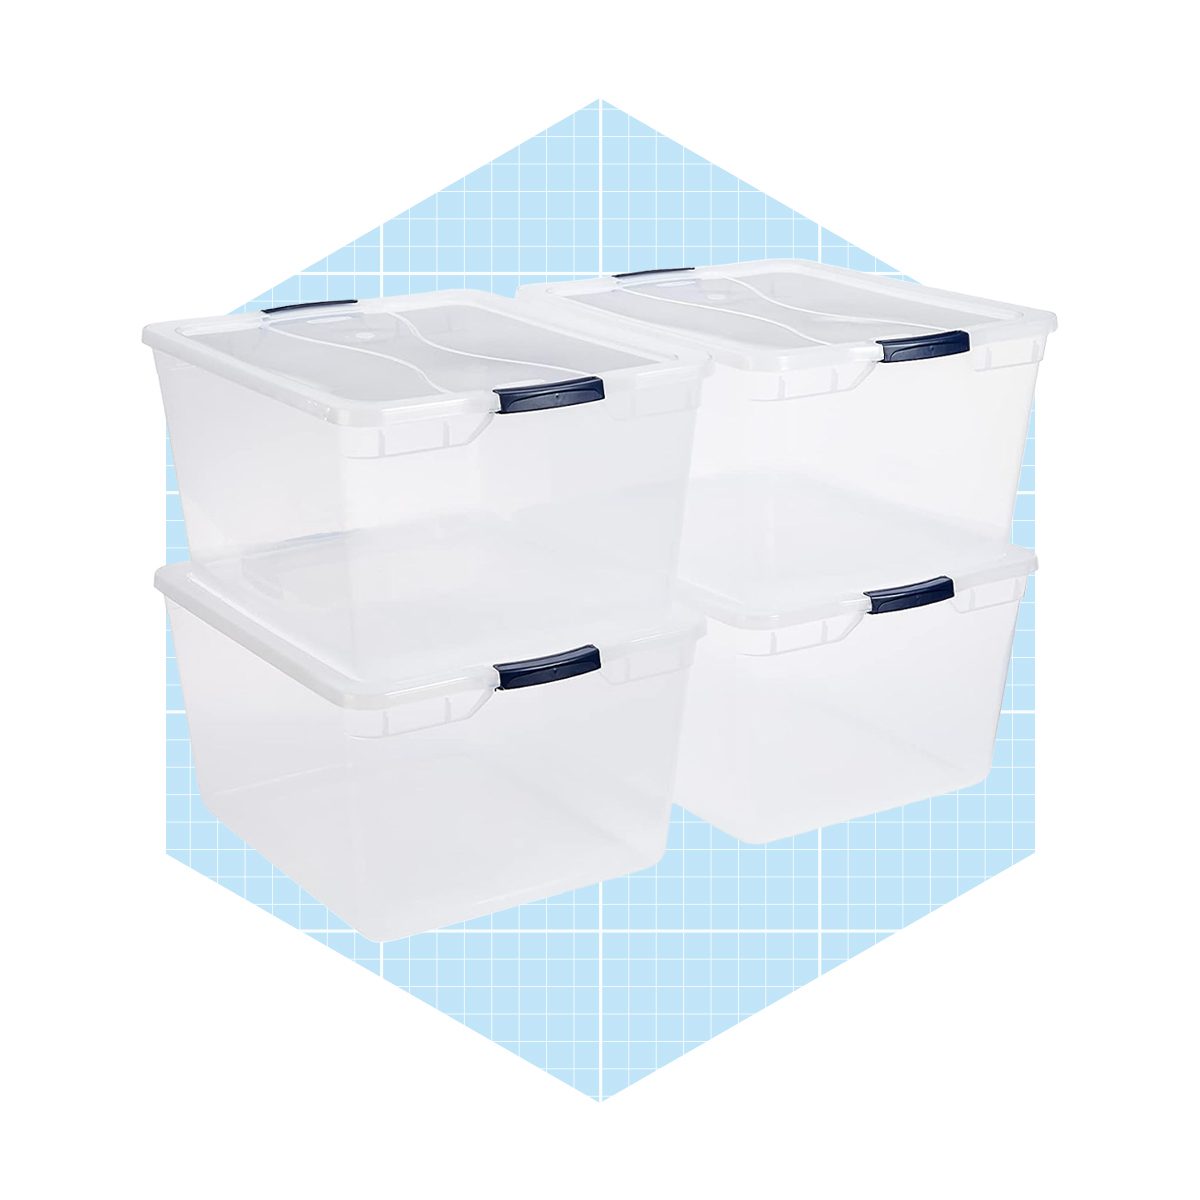 Skywin Plastic Stackable Storage Bins for Pantry - Stackable Bins For  Organizing Food, Kitchen, and Bathroom Essentials (White)